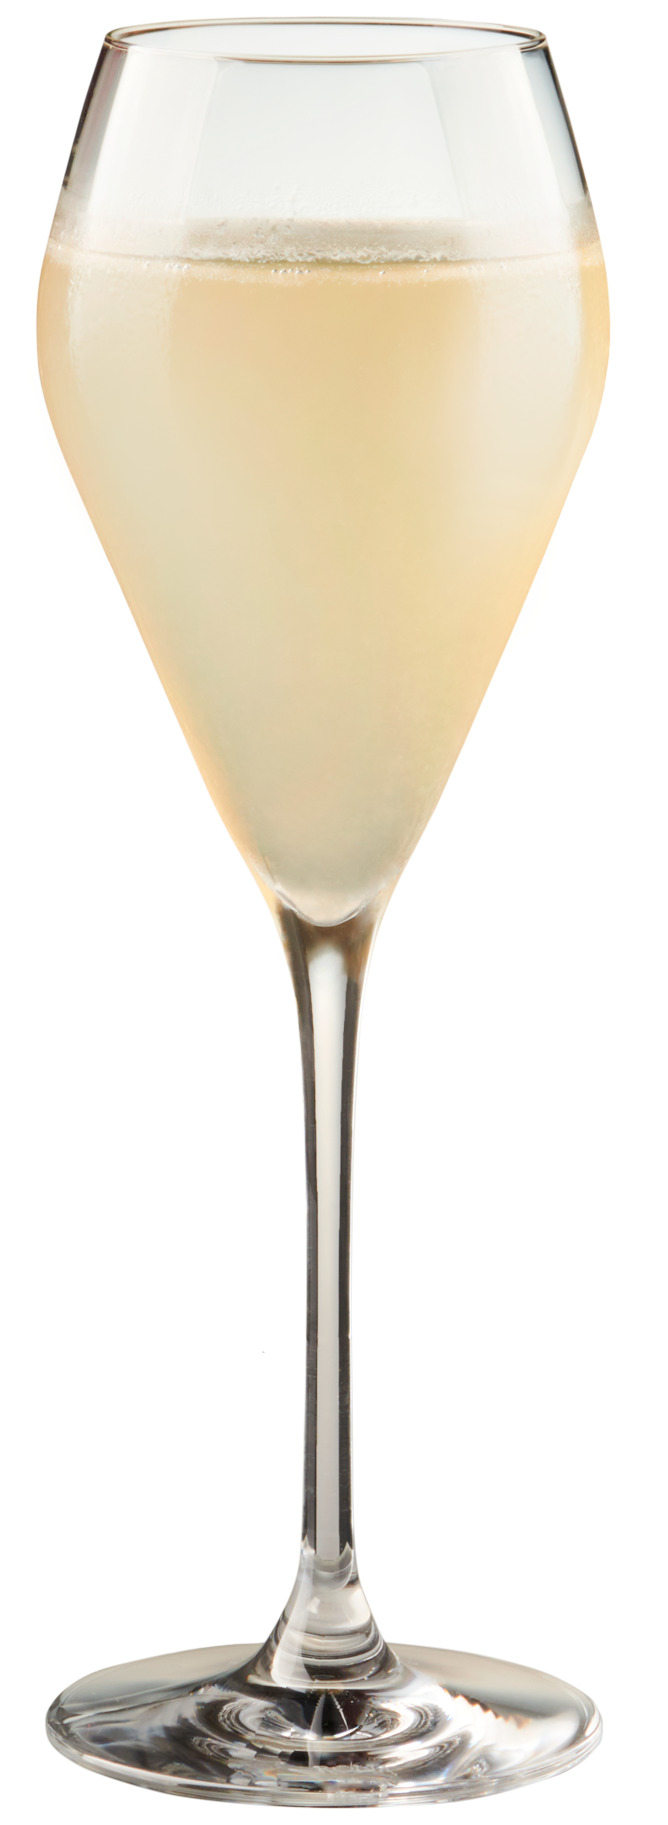 How to Make the French 75